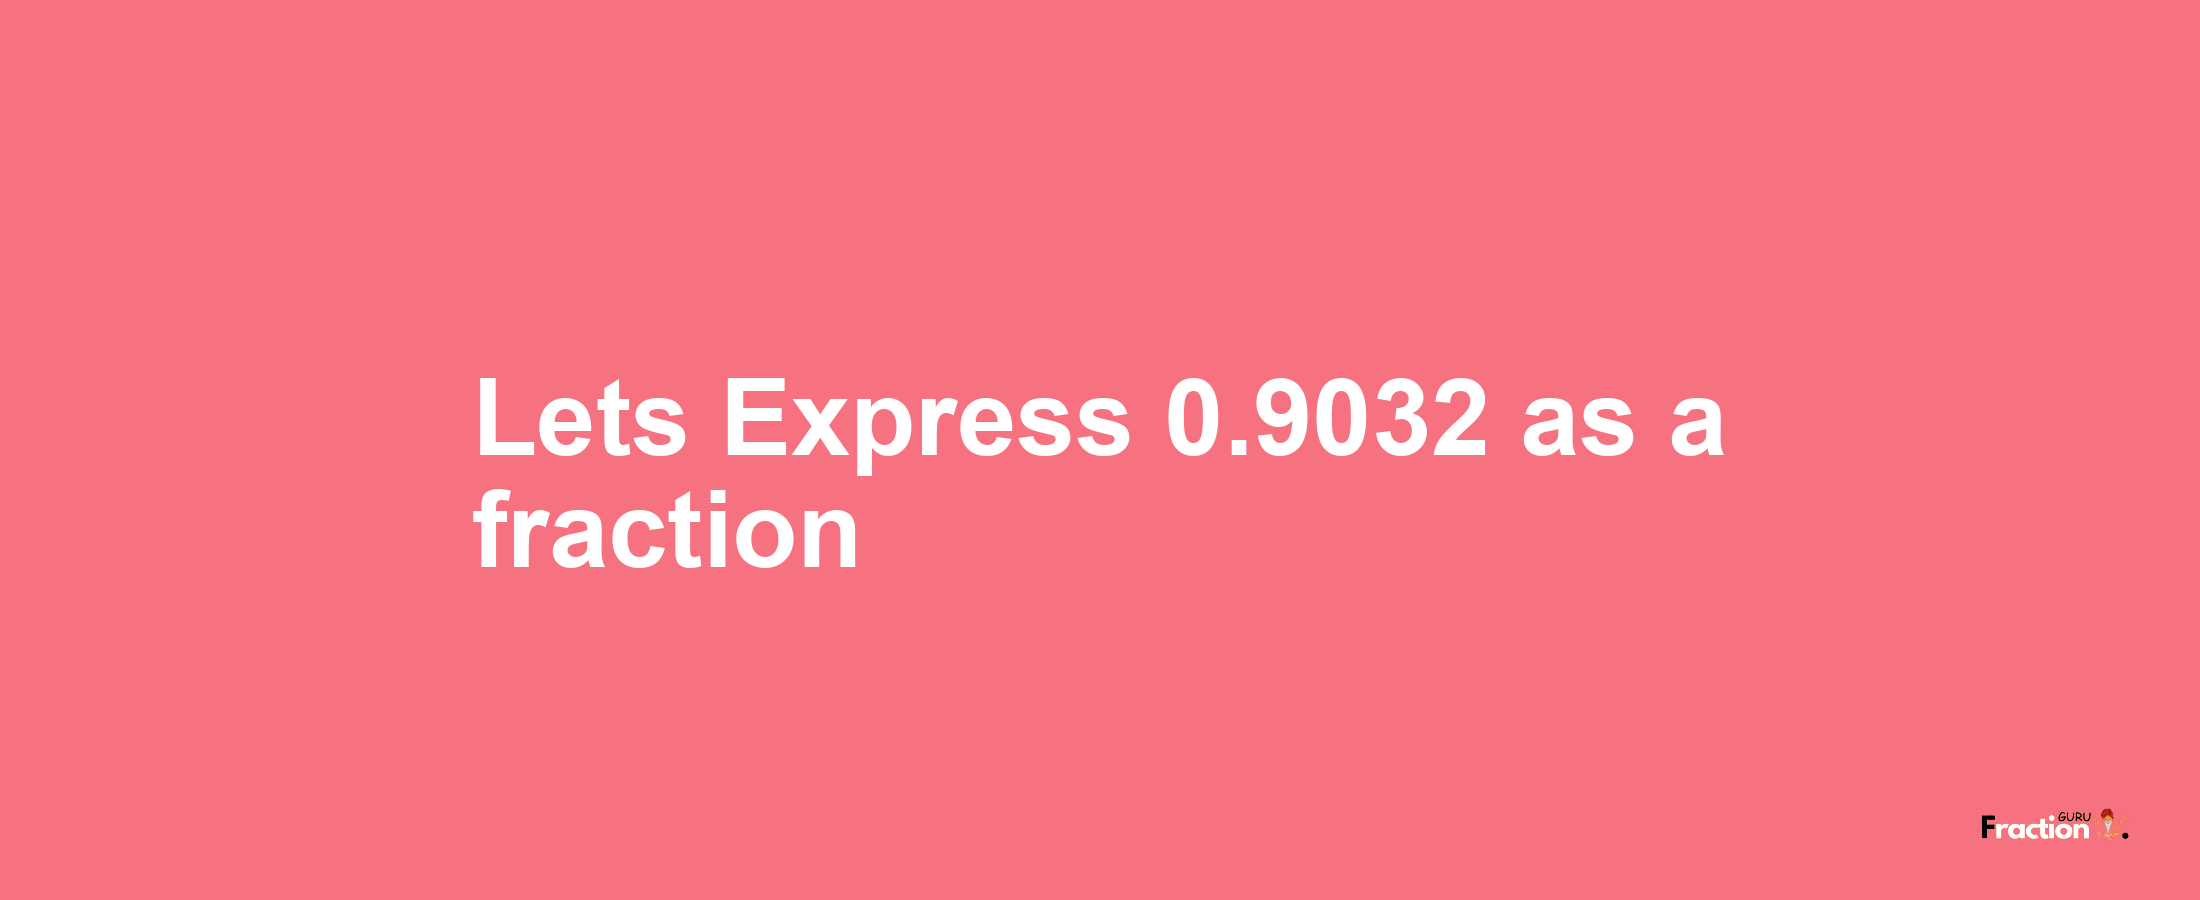 Lets Express 0.9032 as afraction